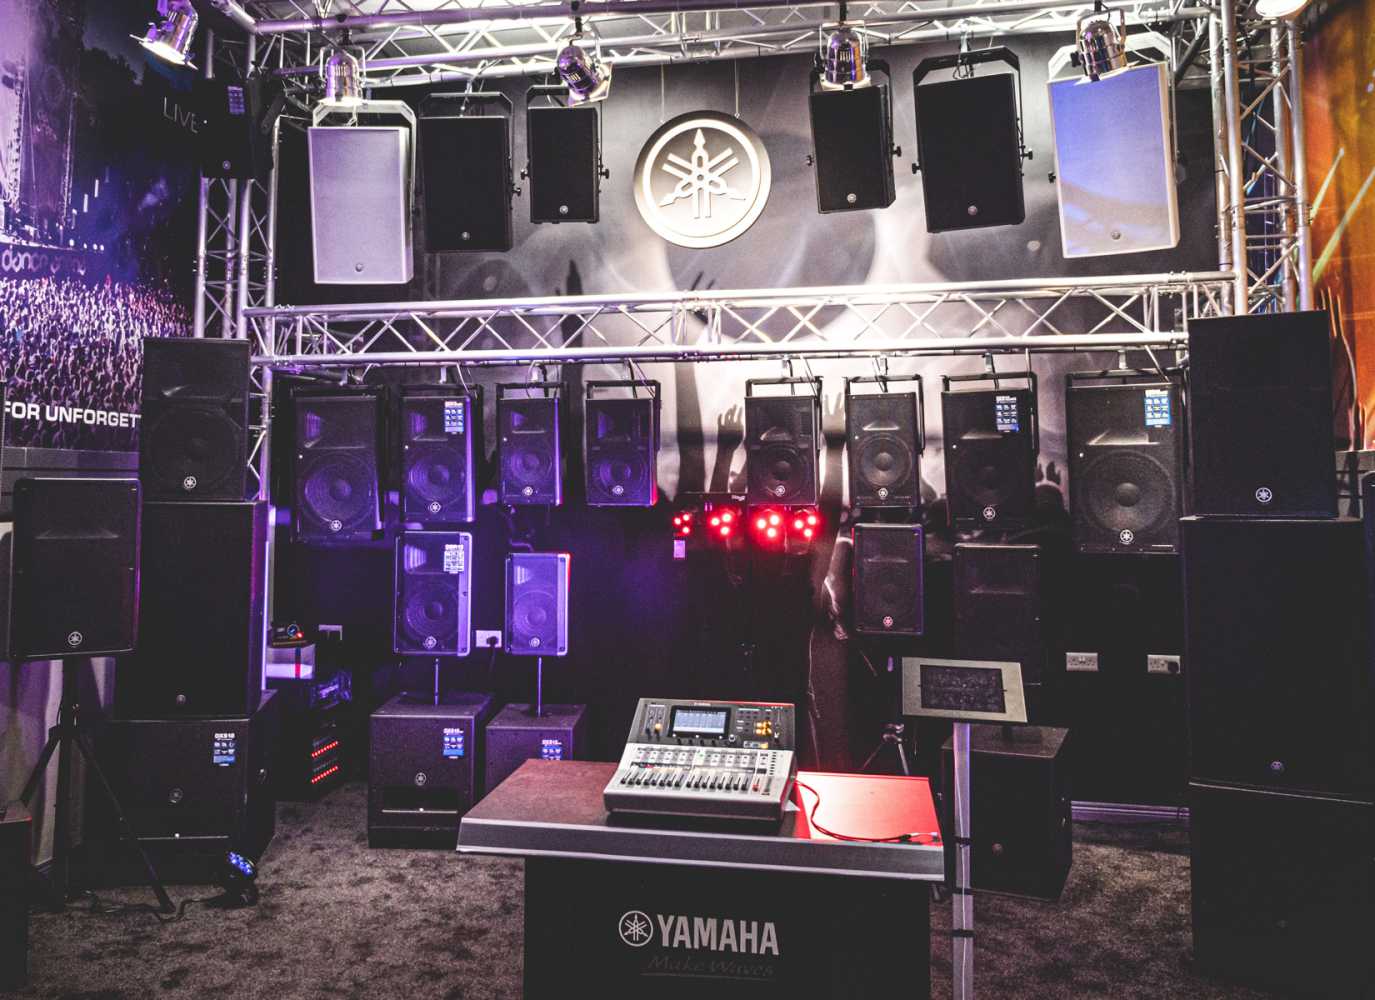 ‘The new PA demo space is the result of a shared vision between guitarguitar and Yamaha Pro Audio’